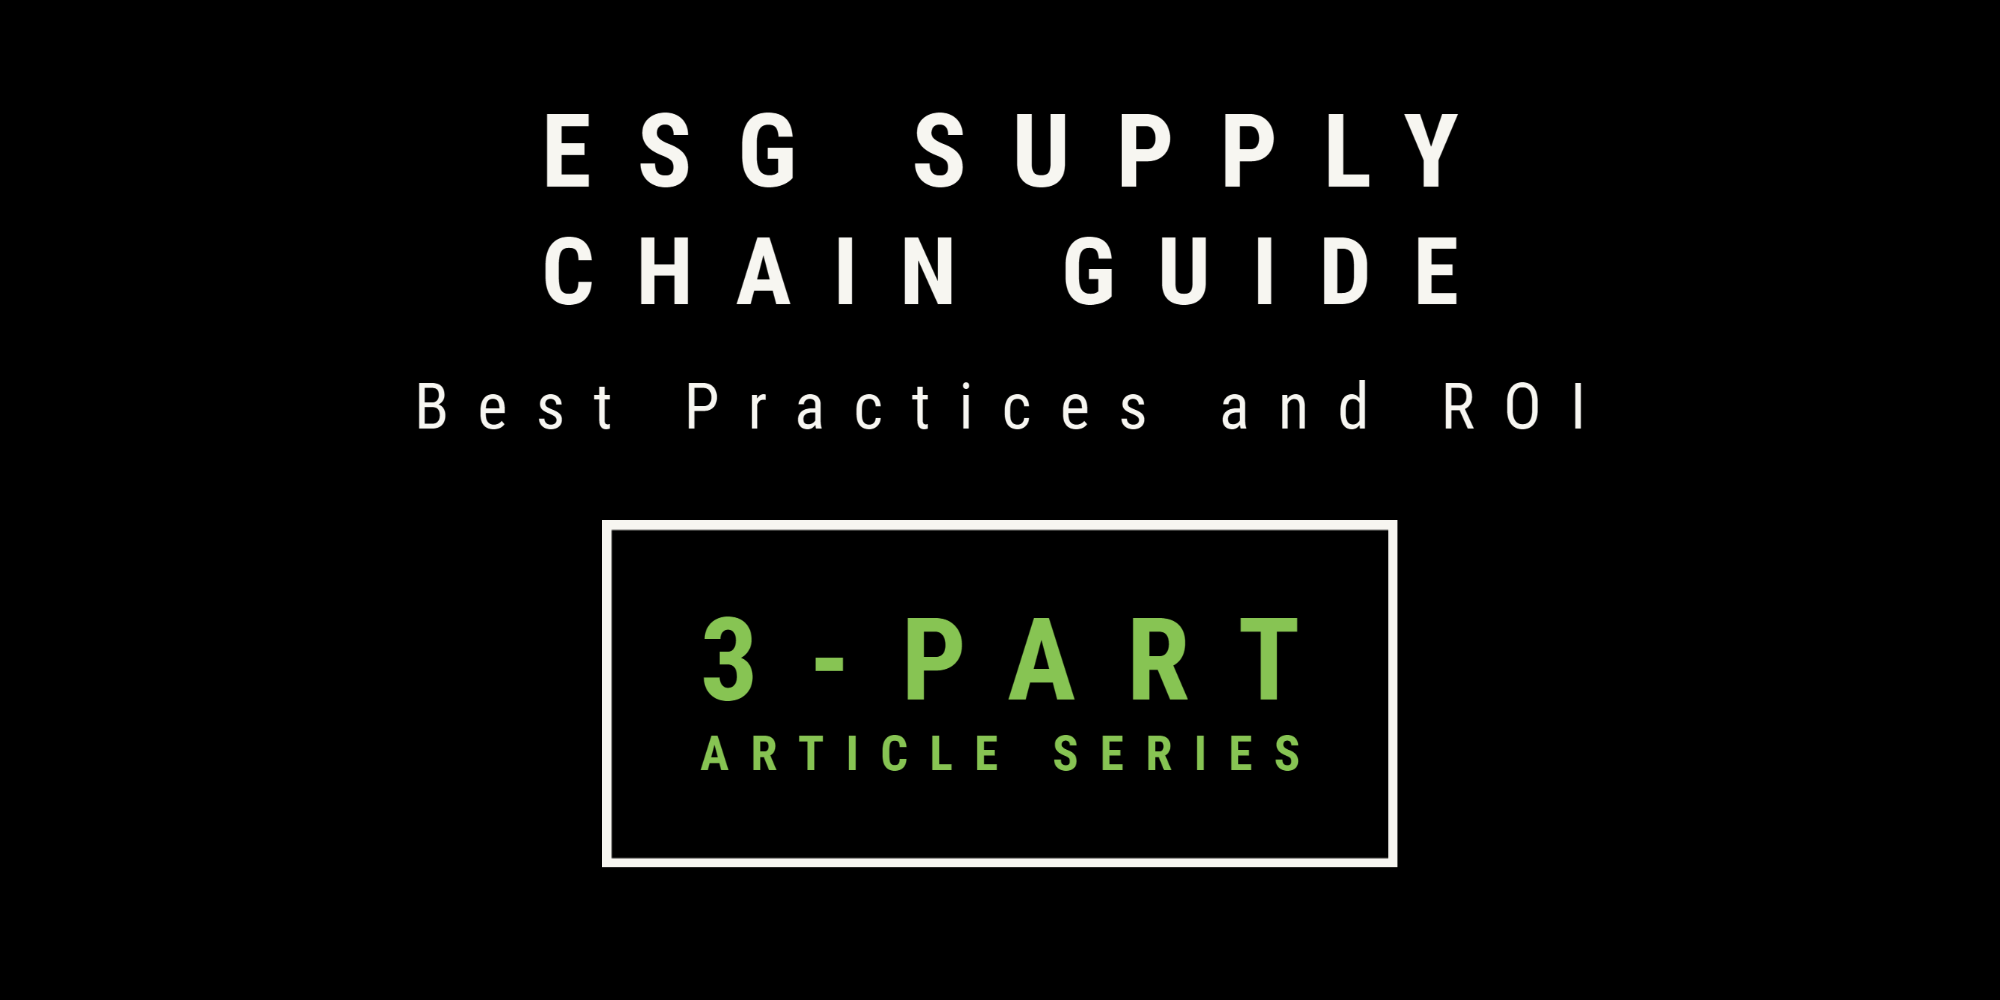 The Simple Guide to ESG in the Supply Chain